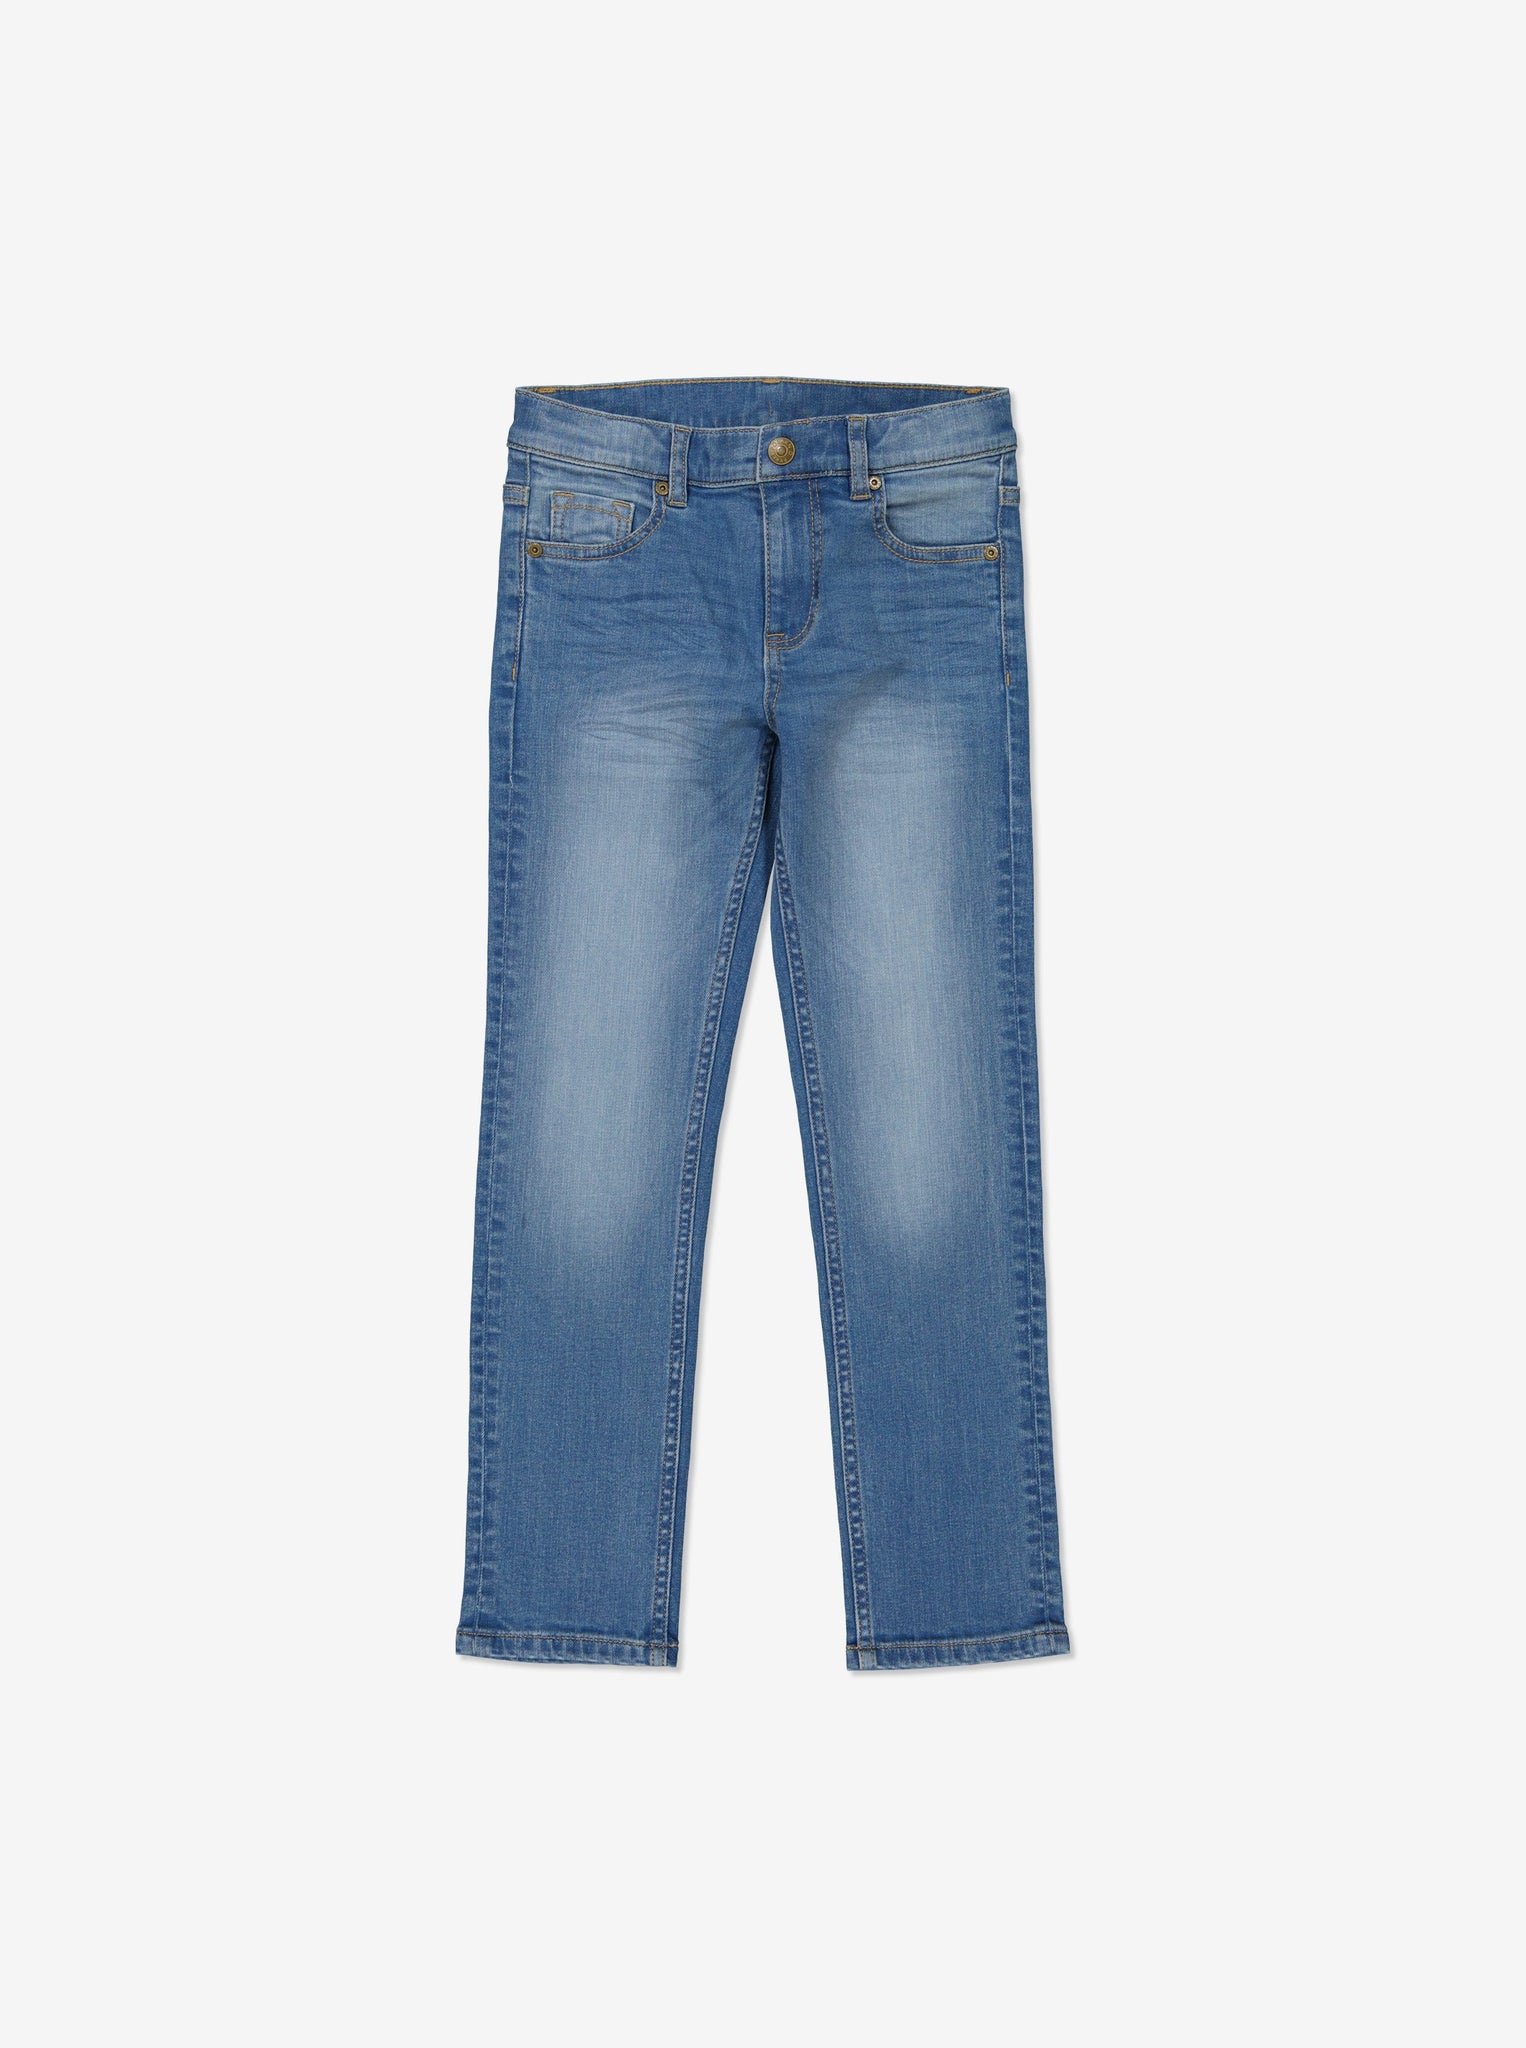  Organic Slim Fit Kids Light Denim Jeans from Polarn O. Pyret Kidswear. Made from ethically sourced materials.